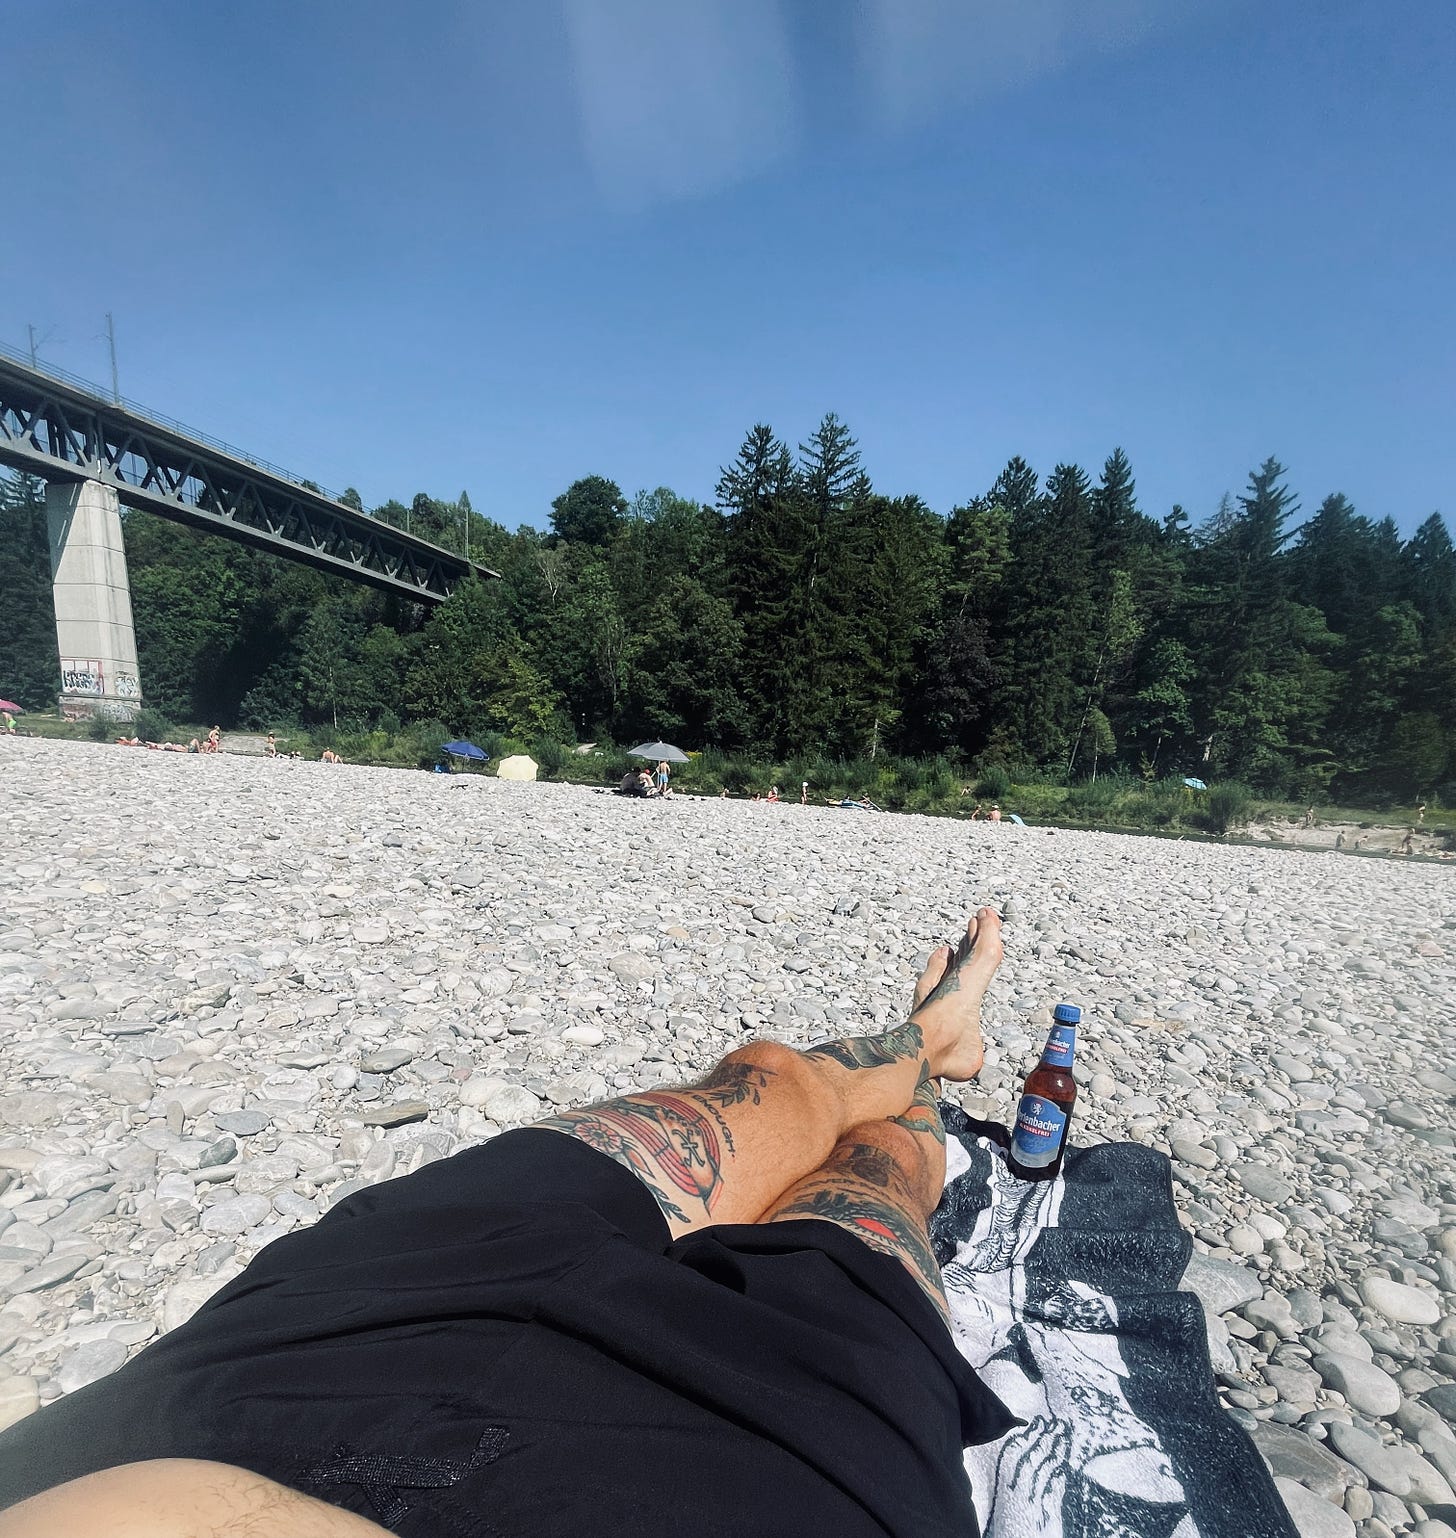 The author lying lazy on a river side enjoying his off-season